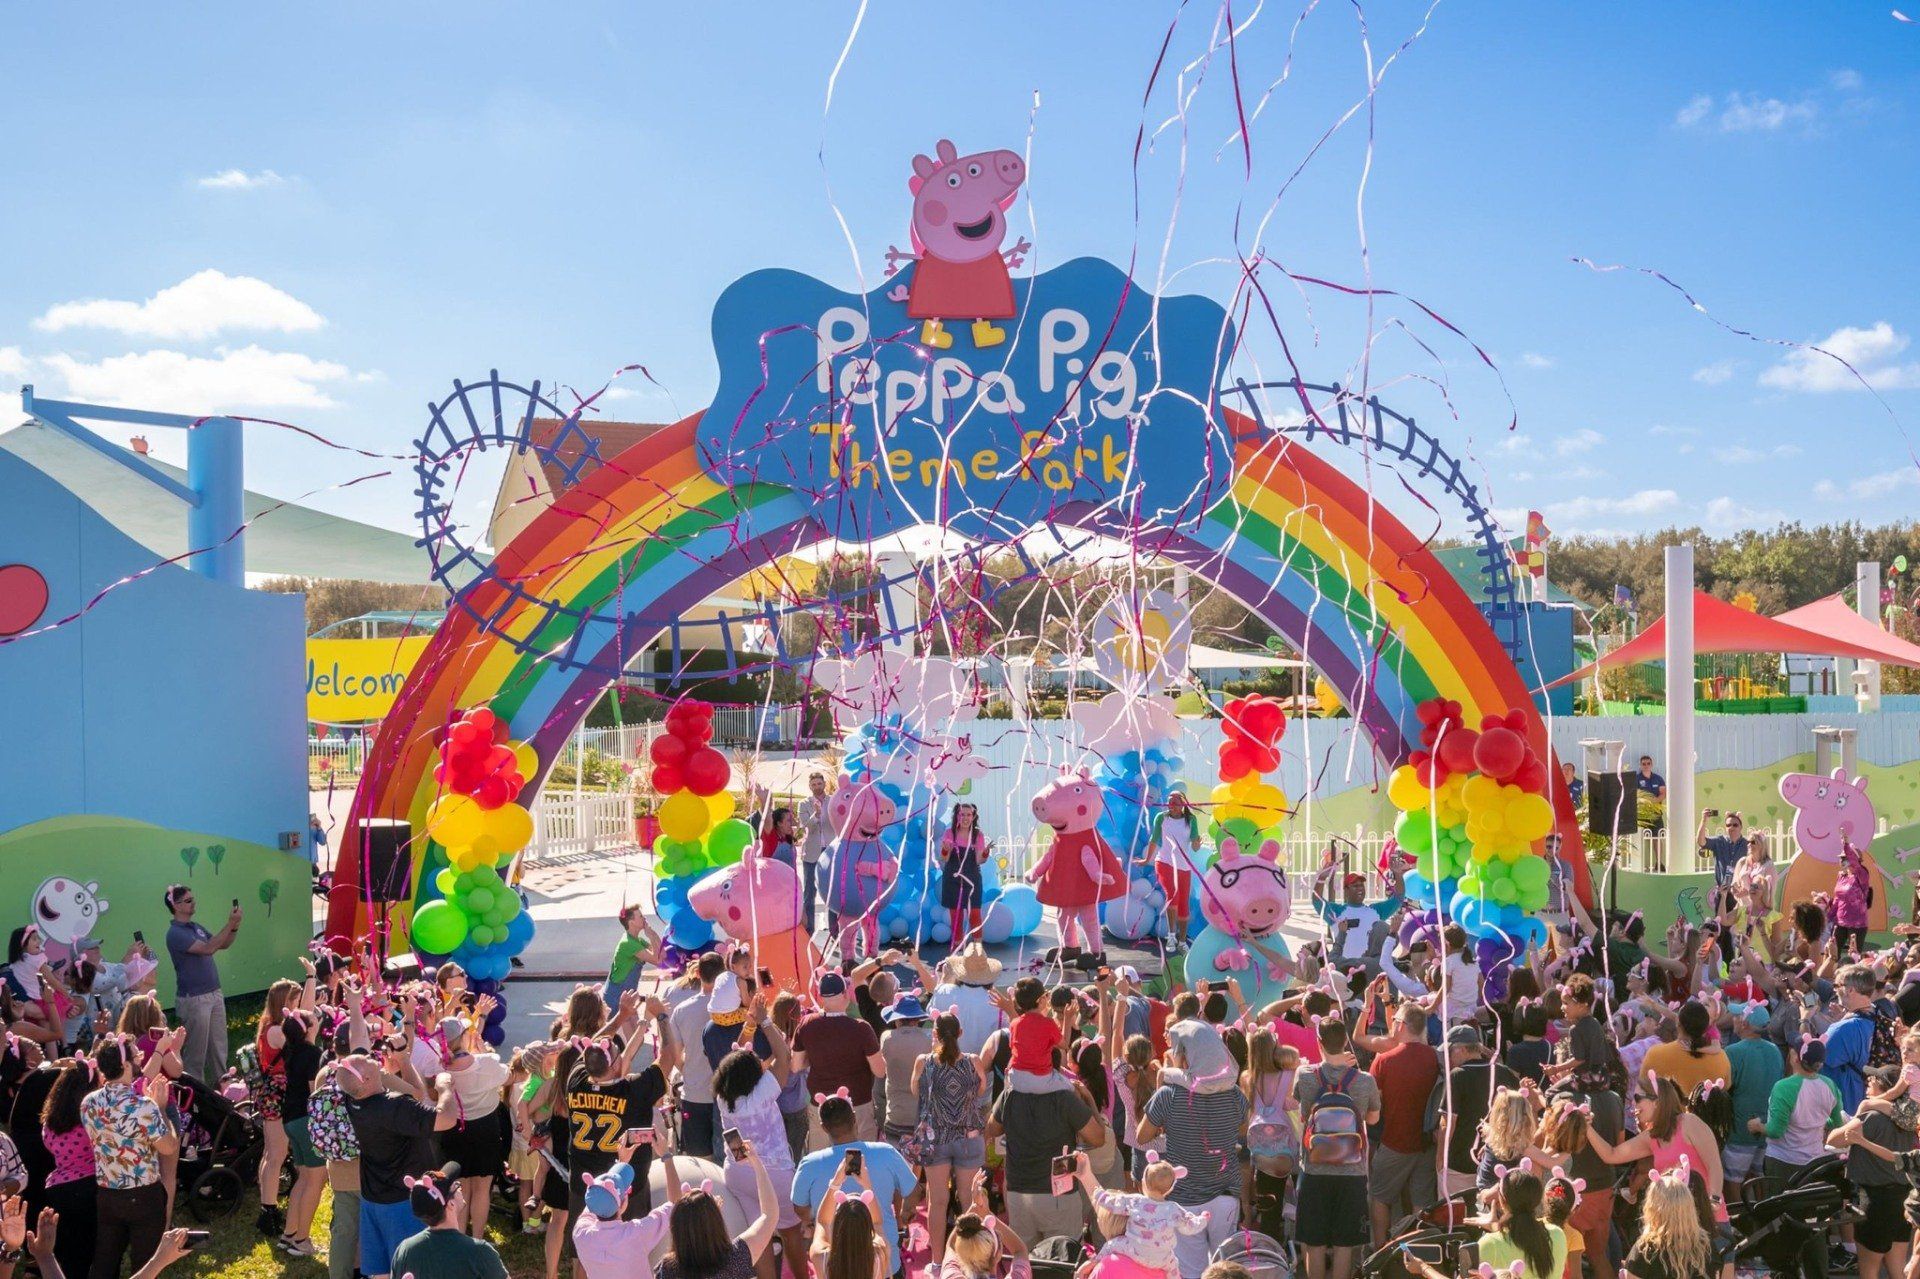 World’s first Peppa Pig Theme Park: world record in Winter Haven, Florida